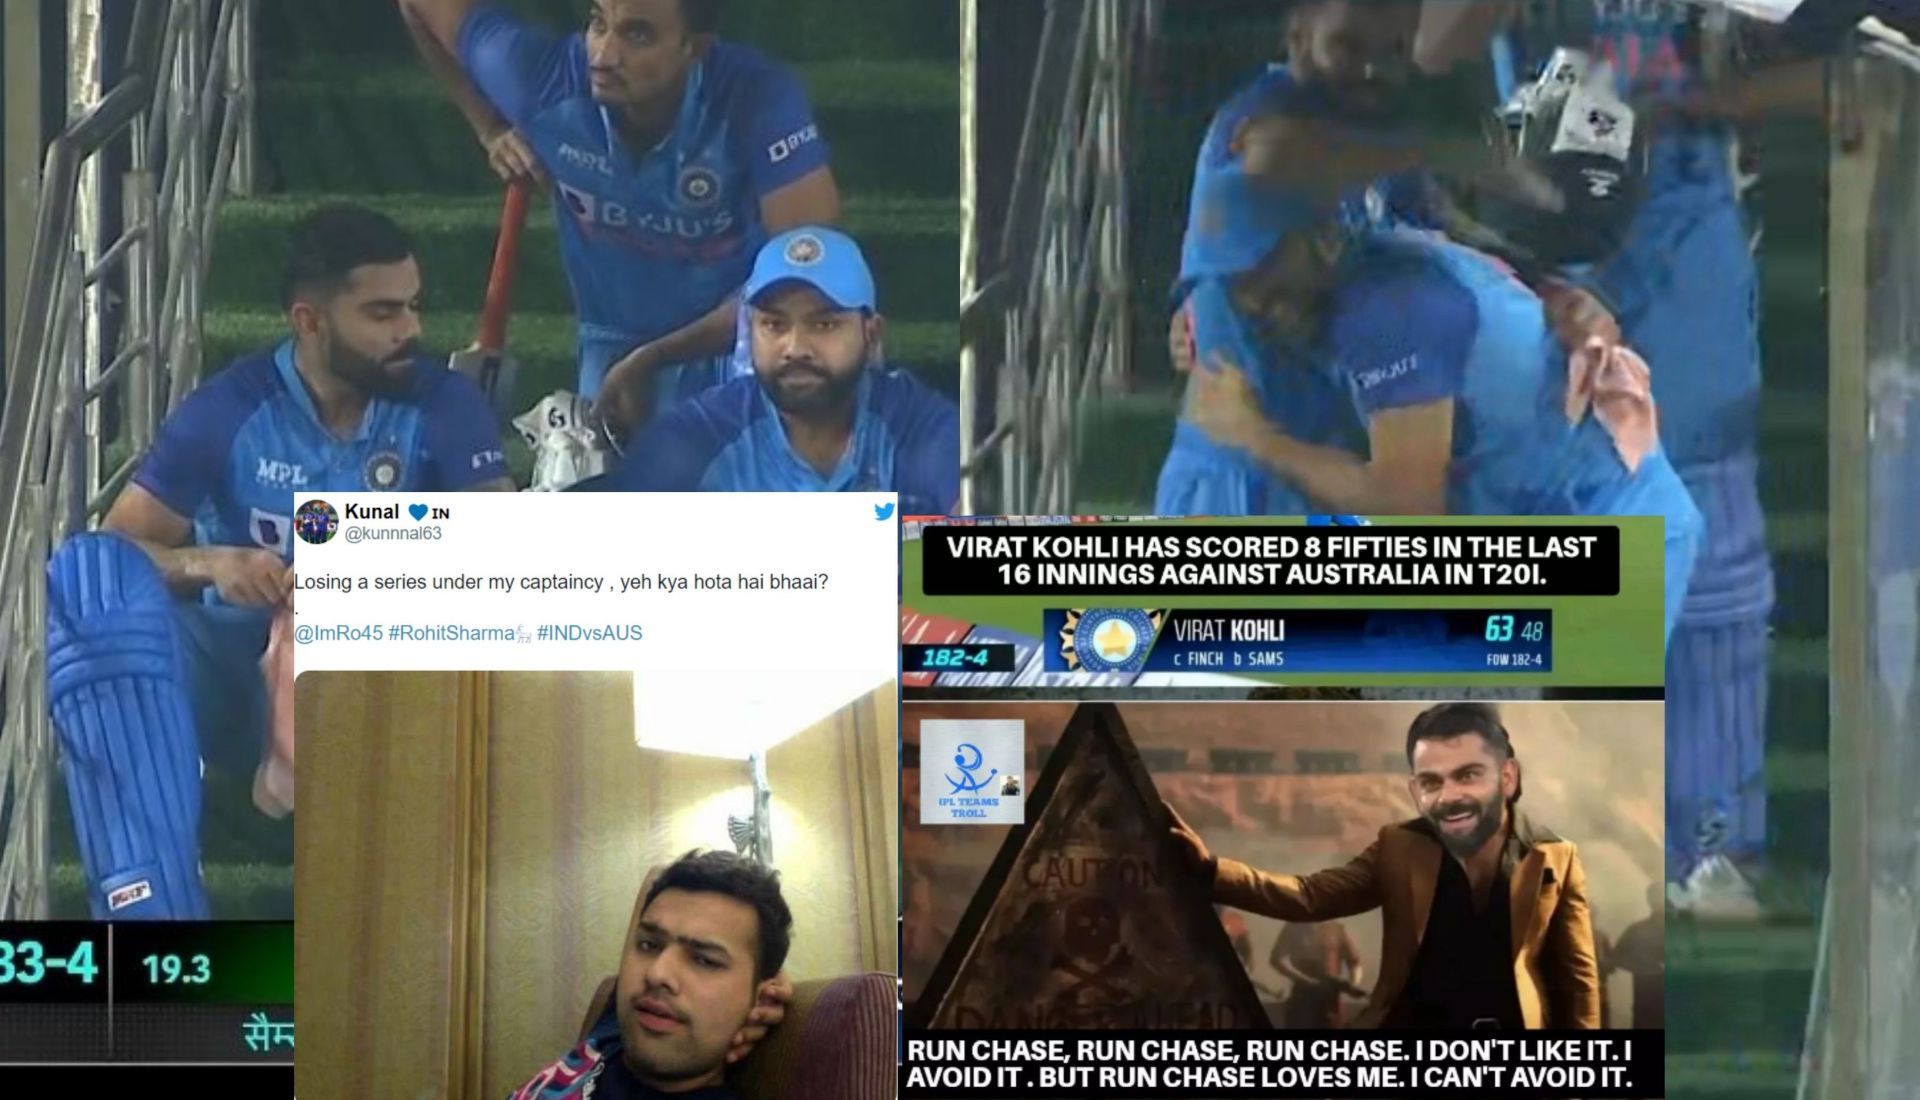 Fans react after India win the T20I series against Australia